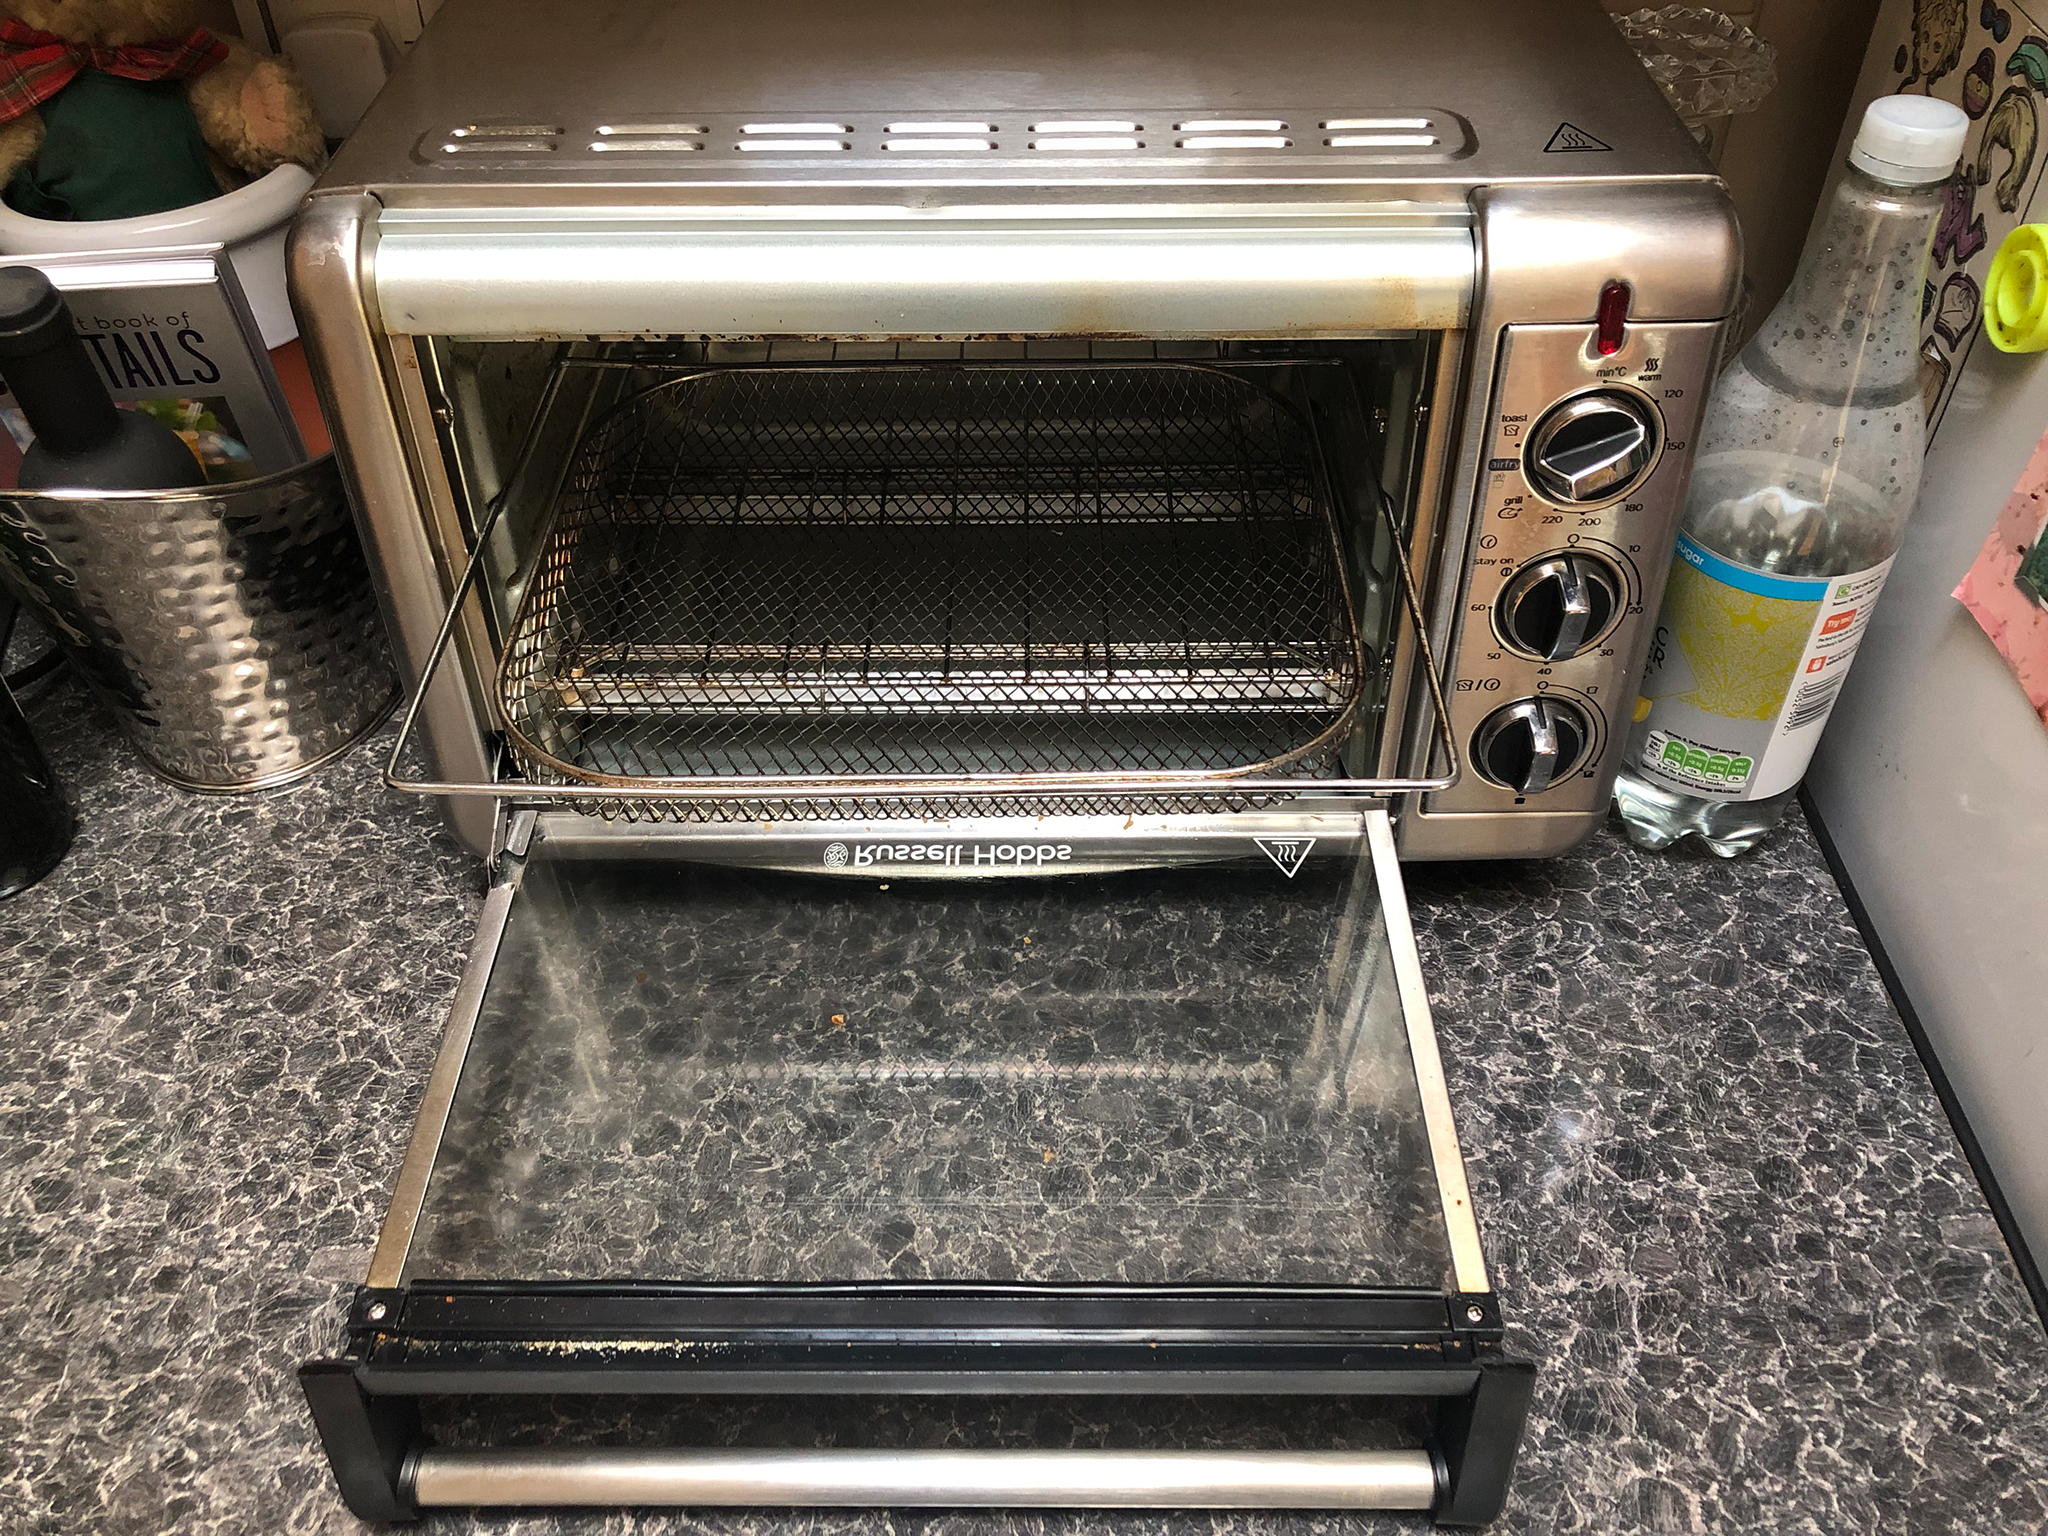 Product Review: The Russell Hobbs Air Fry Crisp'N Bake Toaster Oven –  Renovate